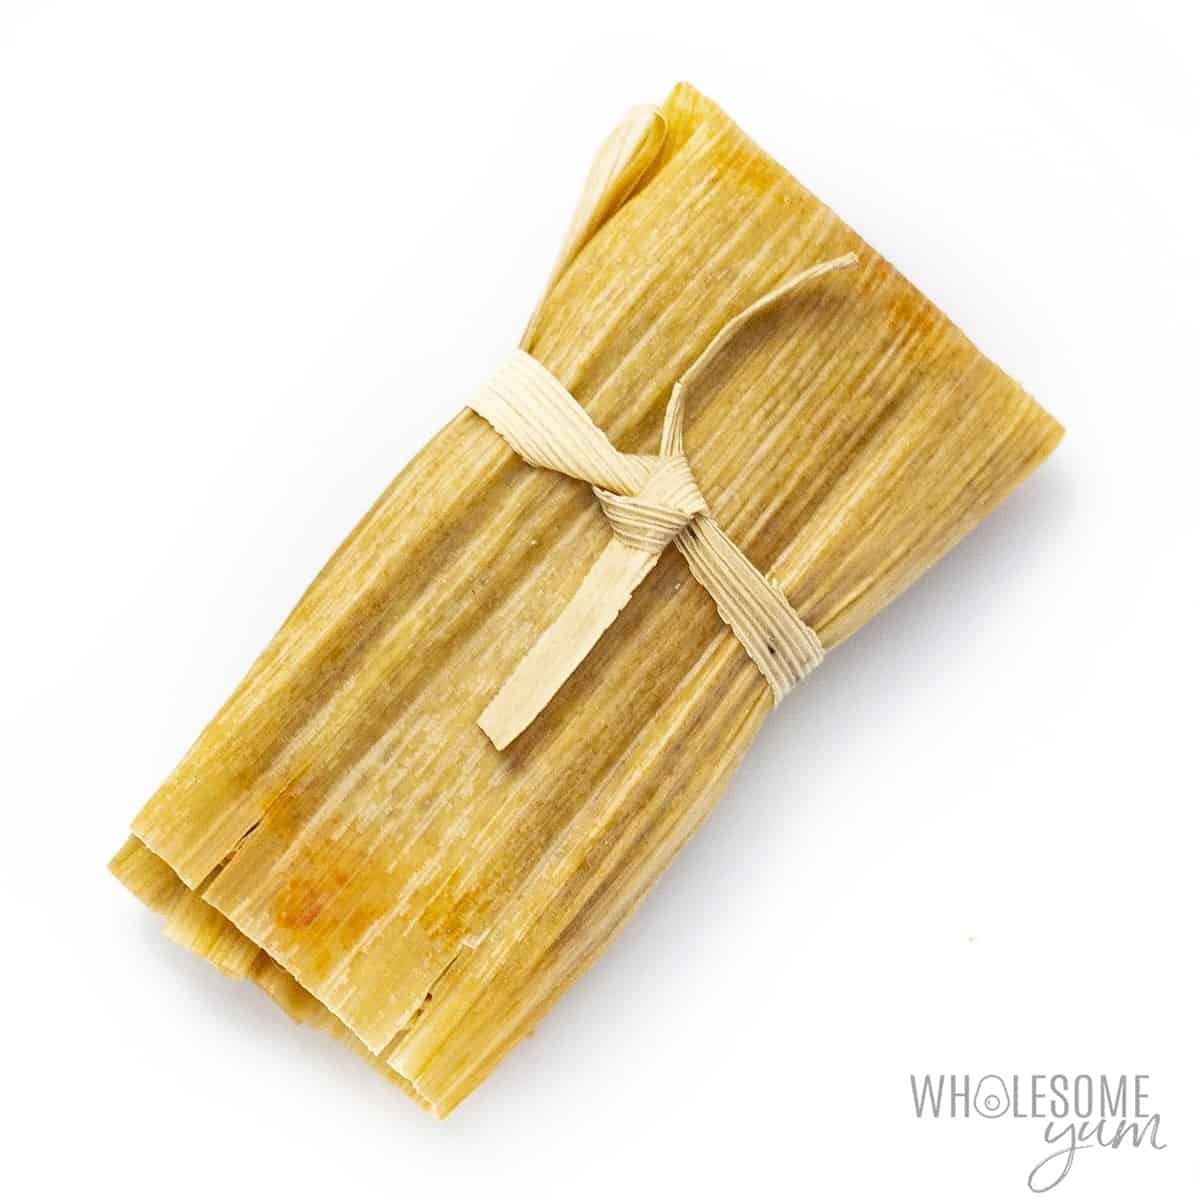 Wrapped low carb tamale with tie.